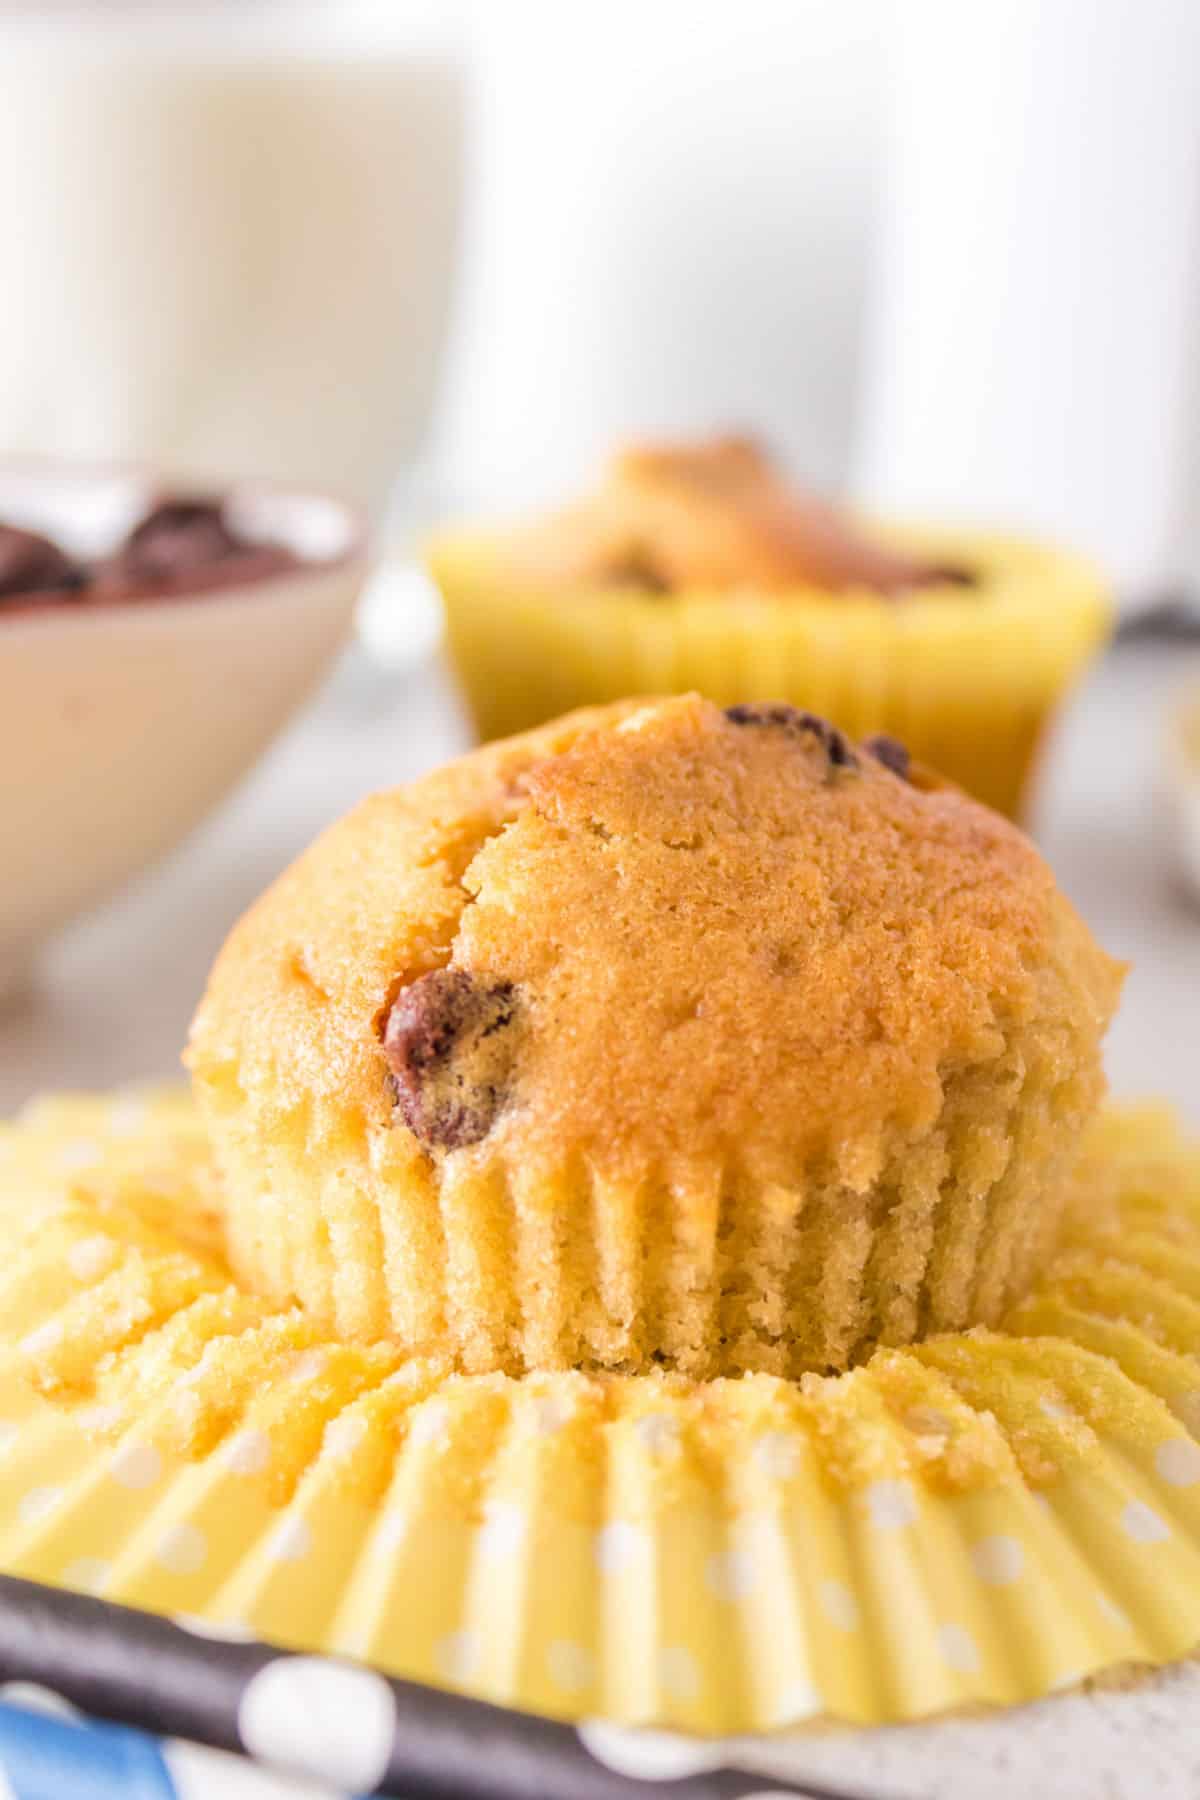 Golden brown chocolate chip muffin fresh from the air fryer.